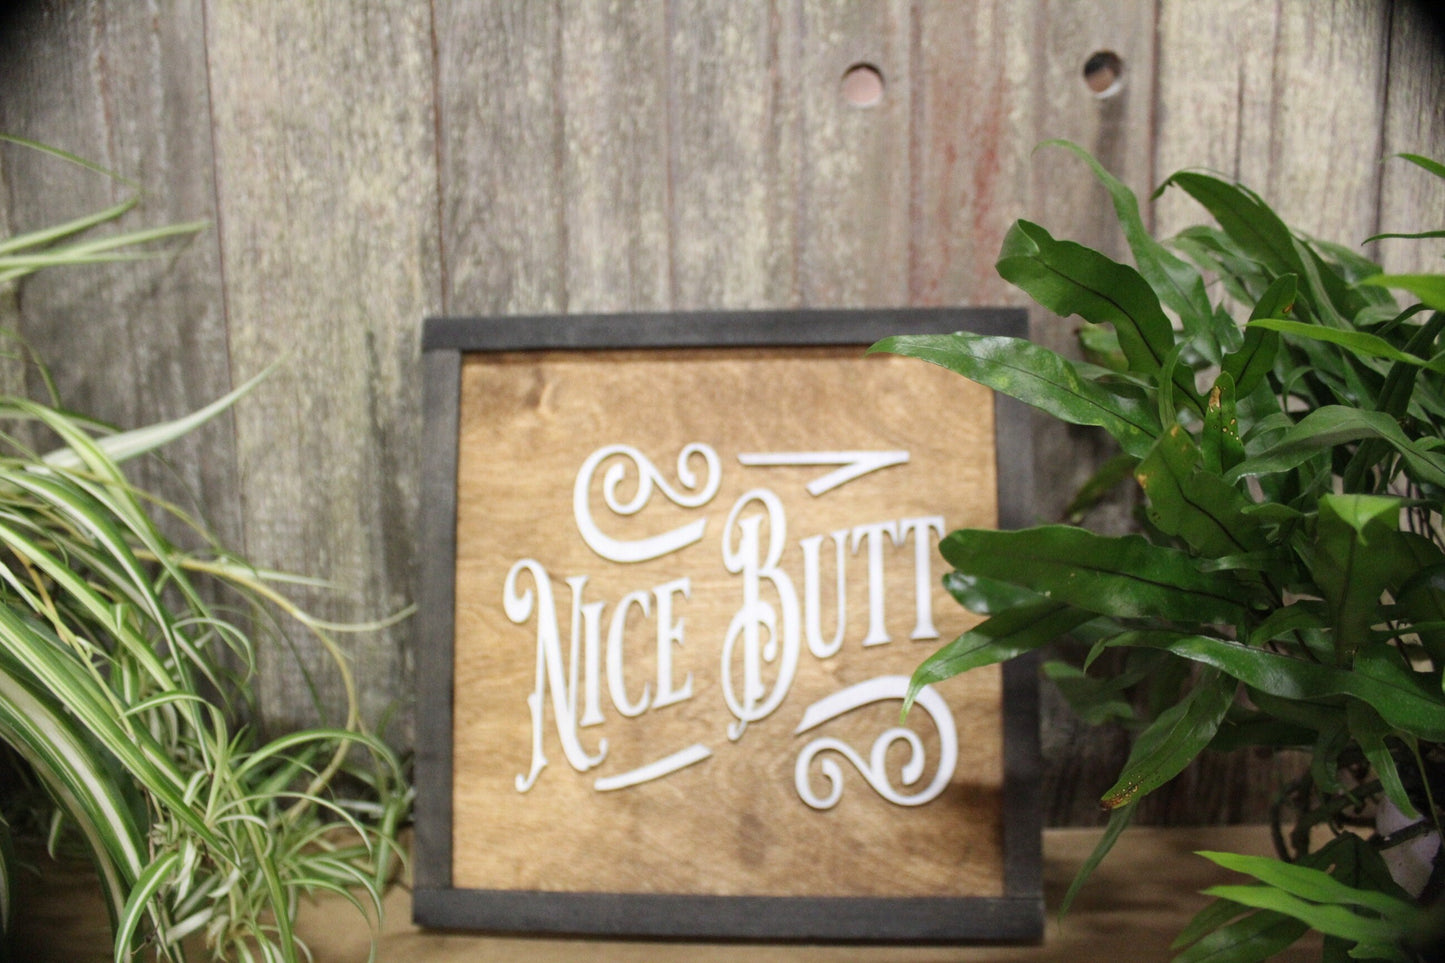 Nice Butt Wooden Square Sign Funny Humor Bathroom Toilet Rustic Primitive Gag Gift Wall Decor Farmhouse Decoration Framed Wood Fancy Letters